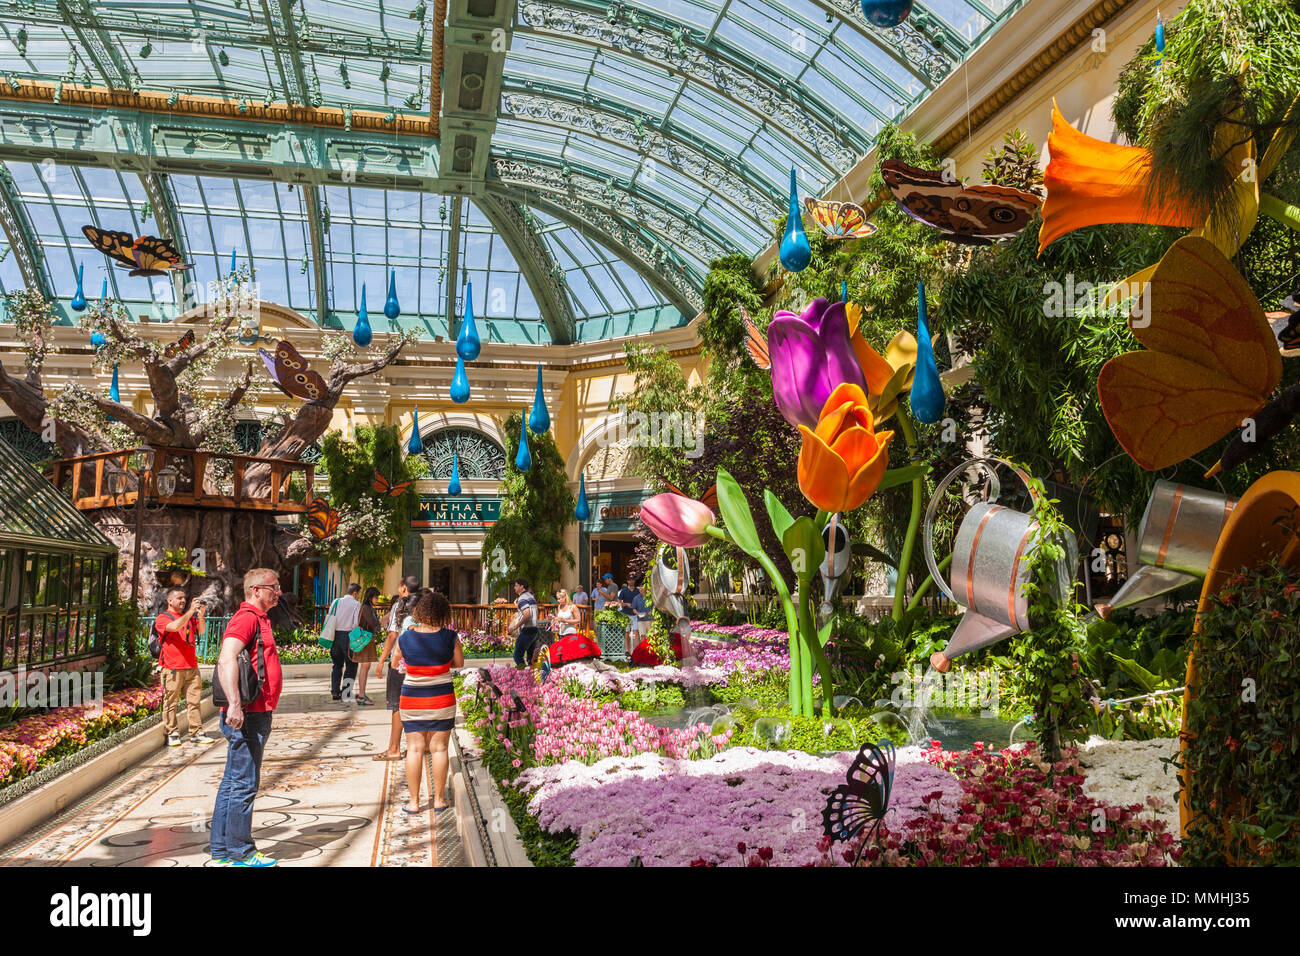 Tourists visiting Bellagio's Conservatory & Botanical Gardens in the Bellagio Luxury Resort and Casino on the Las Vegas Strip in Paradise, Nevada Stock Photo